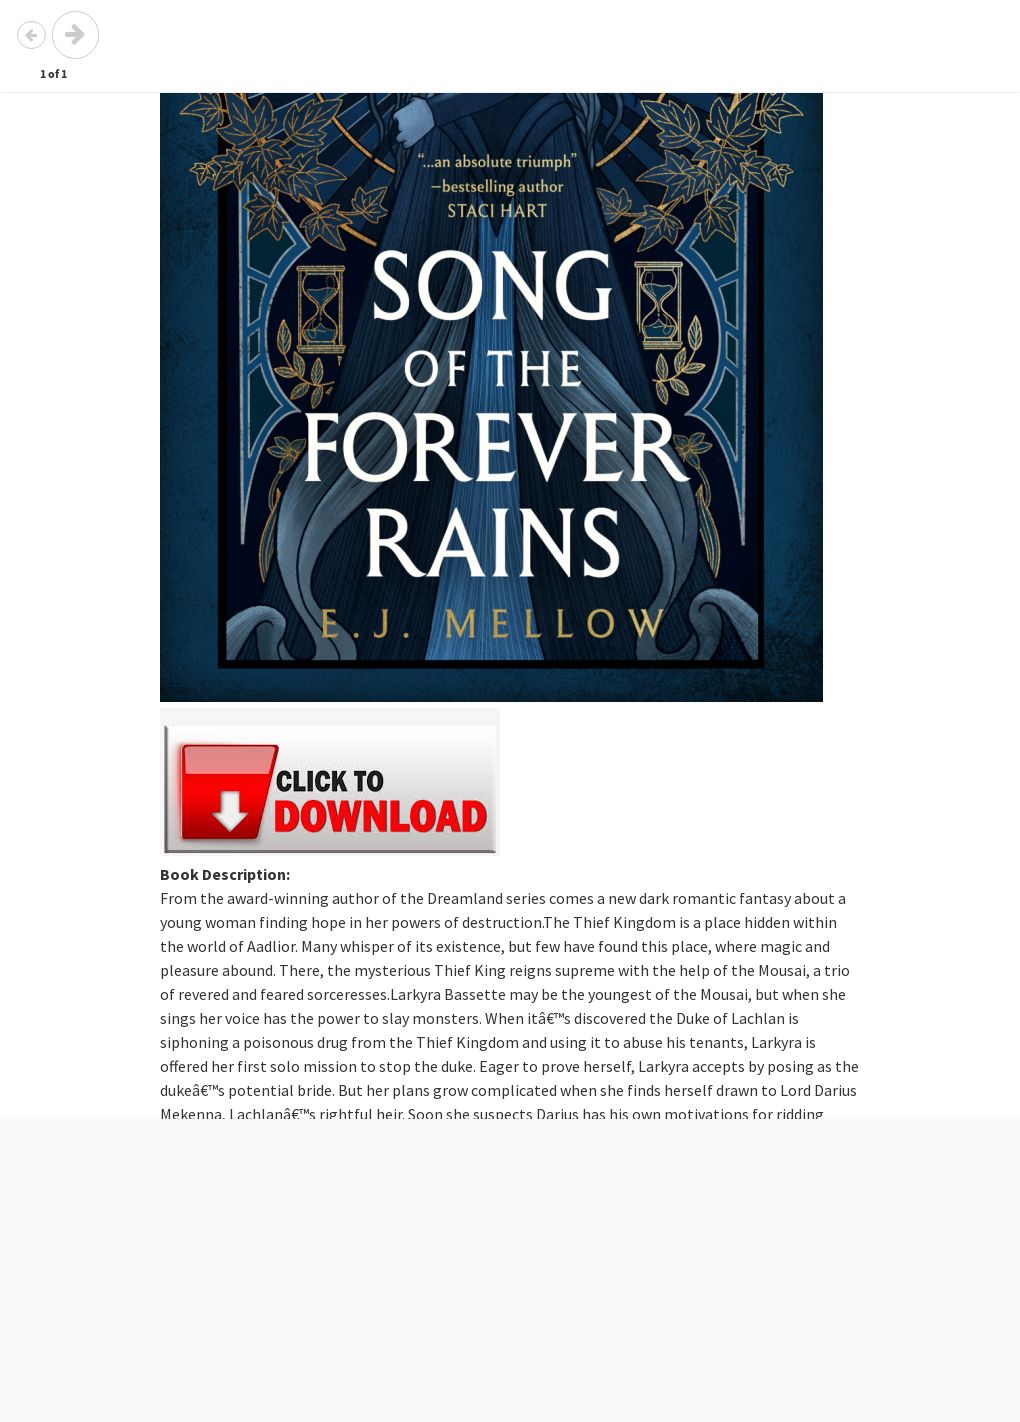 song of the forever rains series